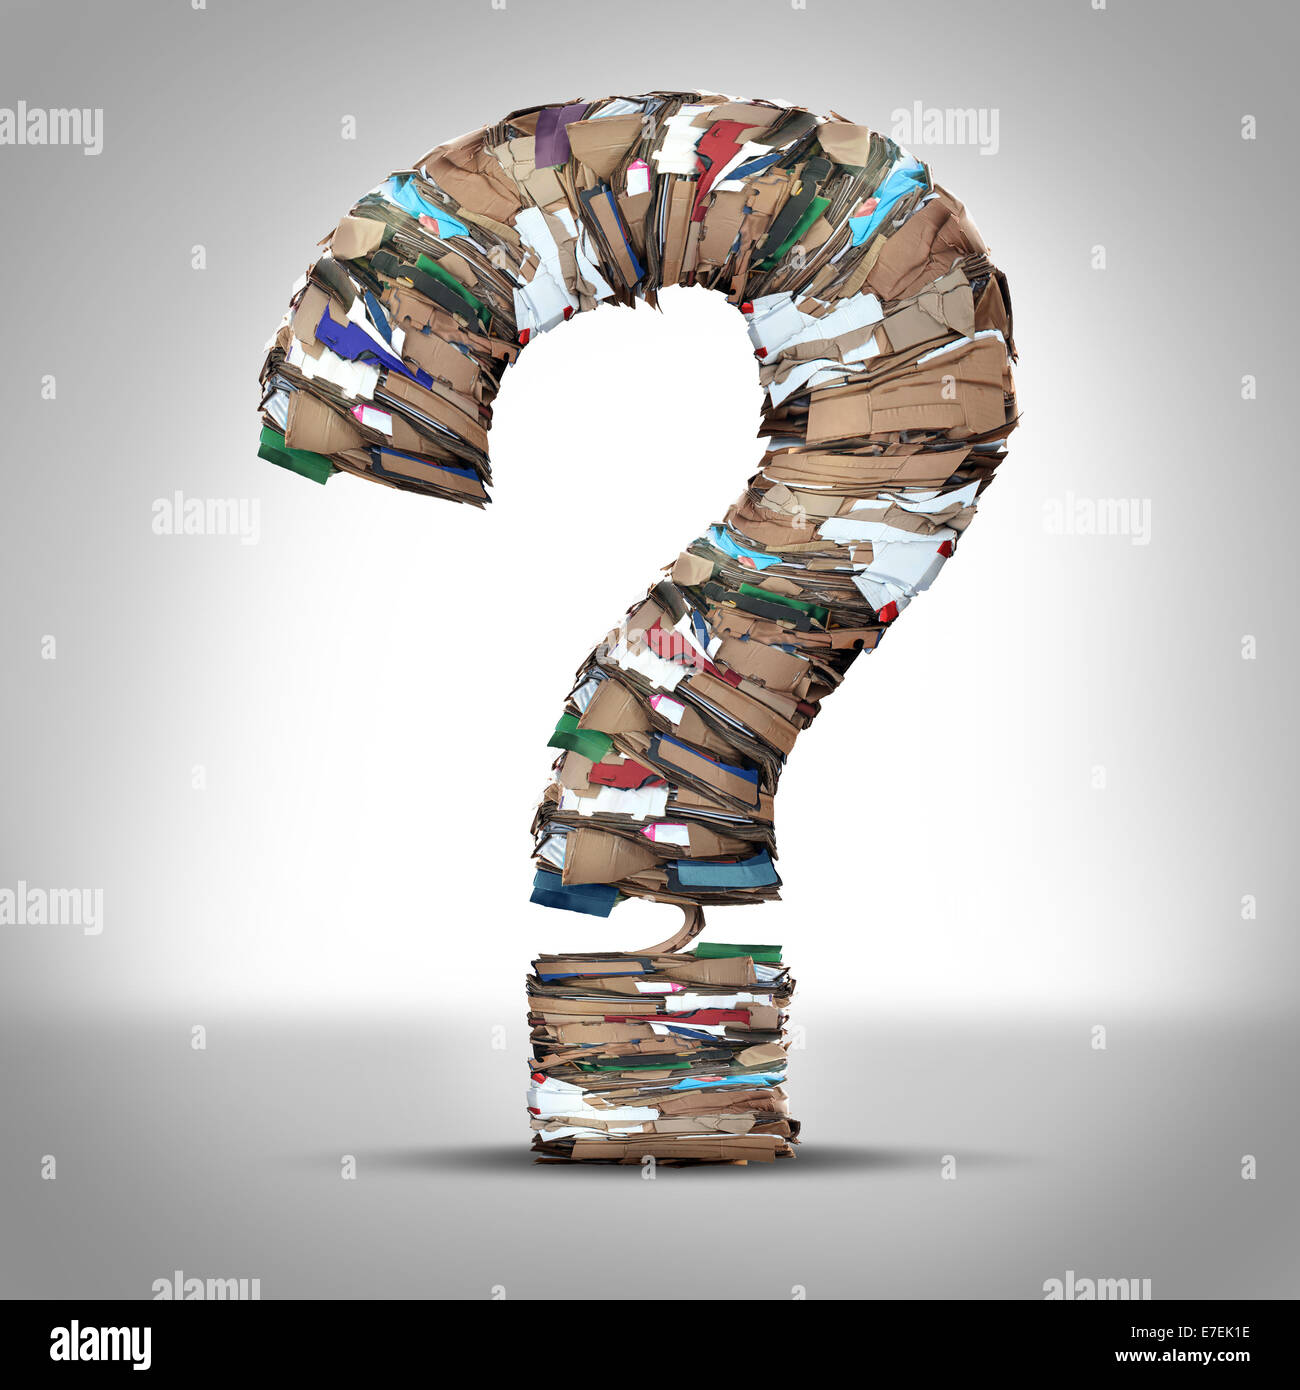 Recycle Cardboard Paper Questions and recycling cardboard packaging concept with stacks of compressed corrugated paper garbage shaped as a question mark as a symbol for conservation and environmental technology business issues. Stock Photo